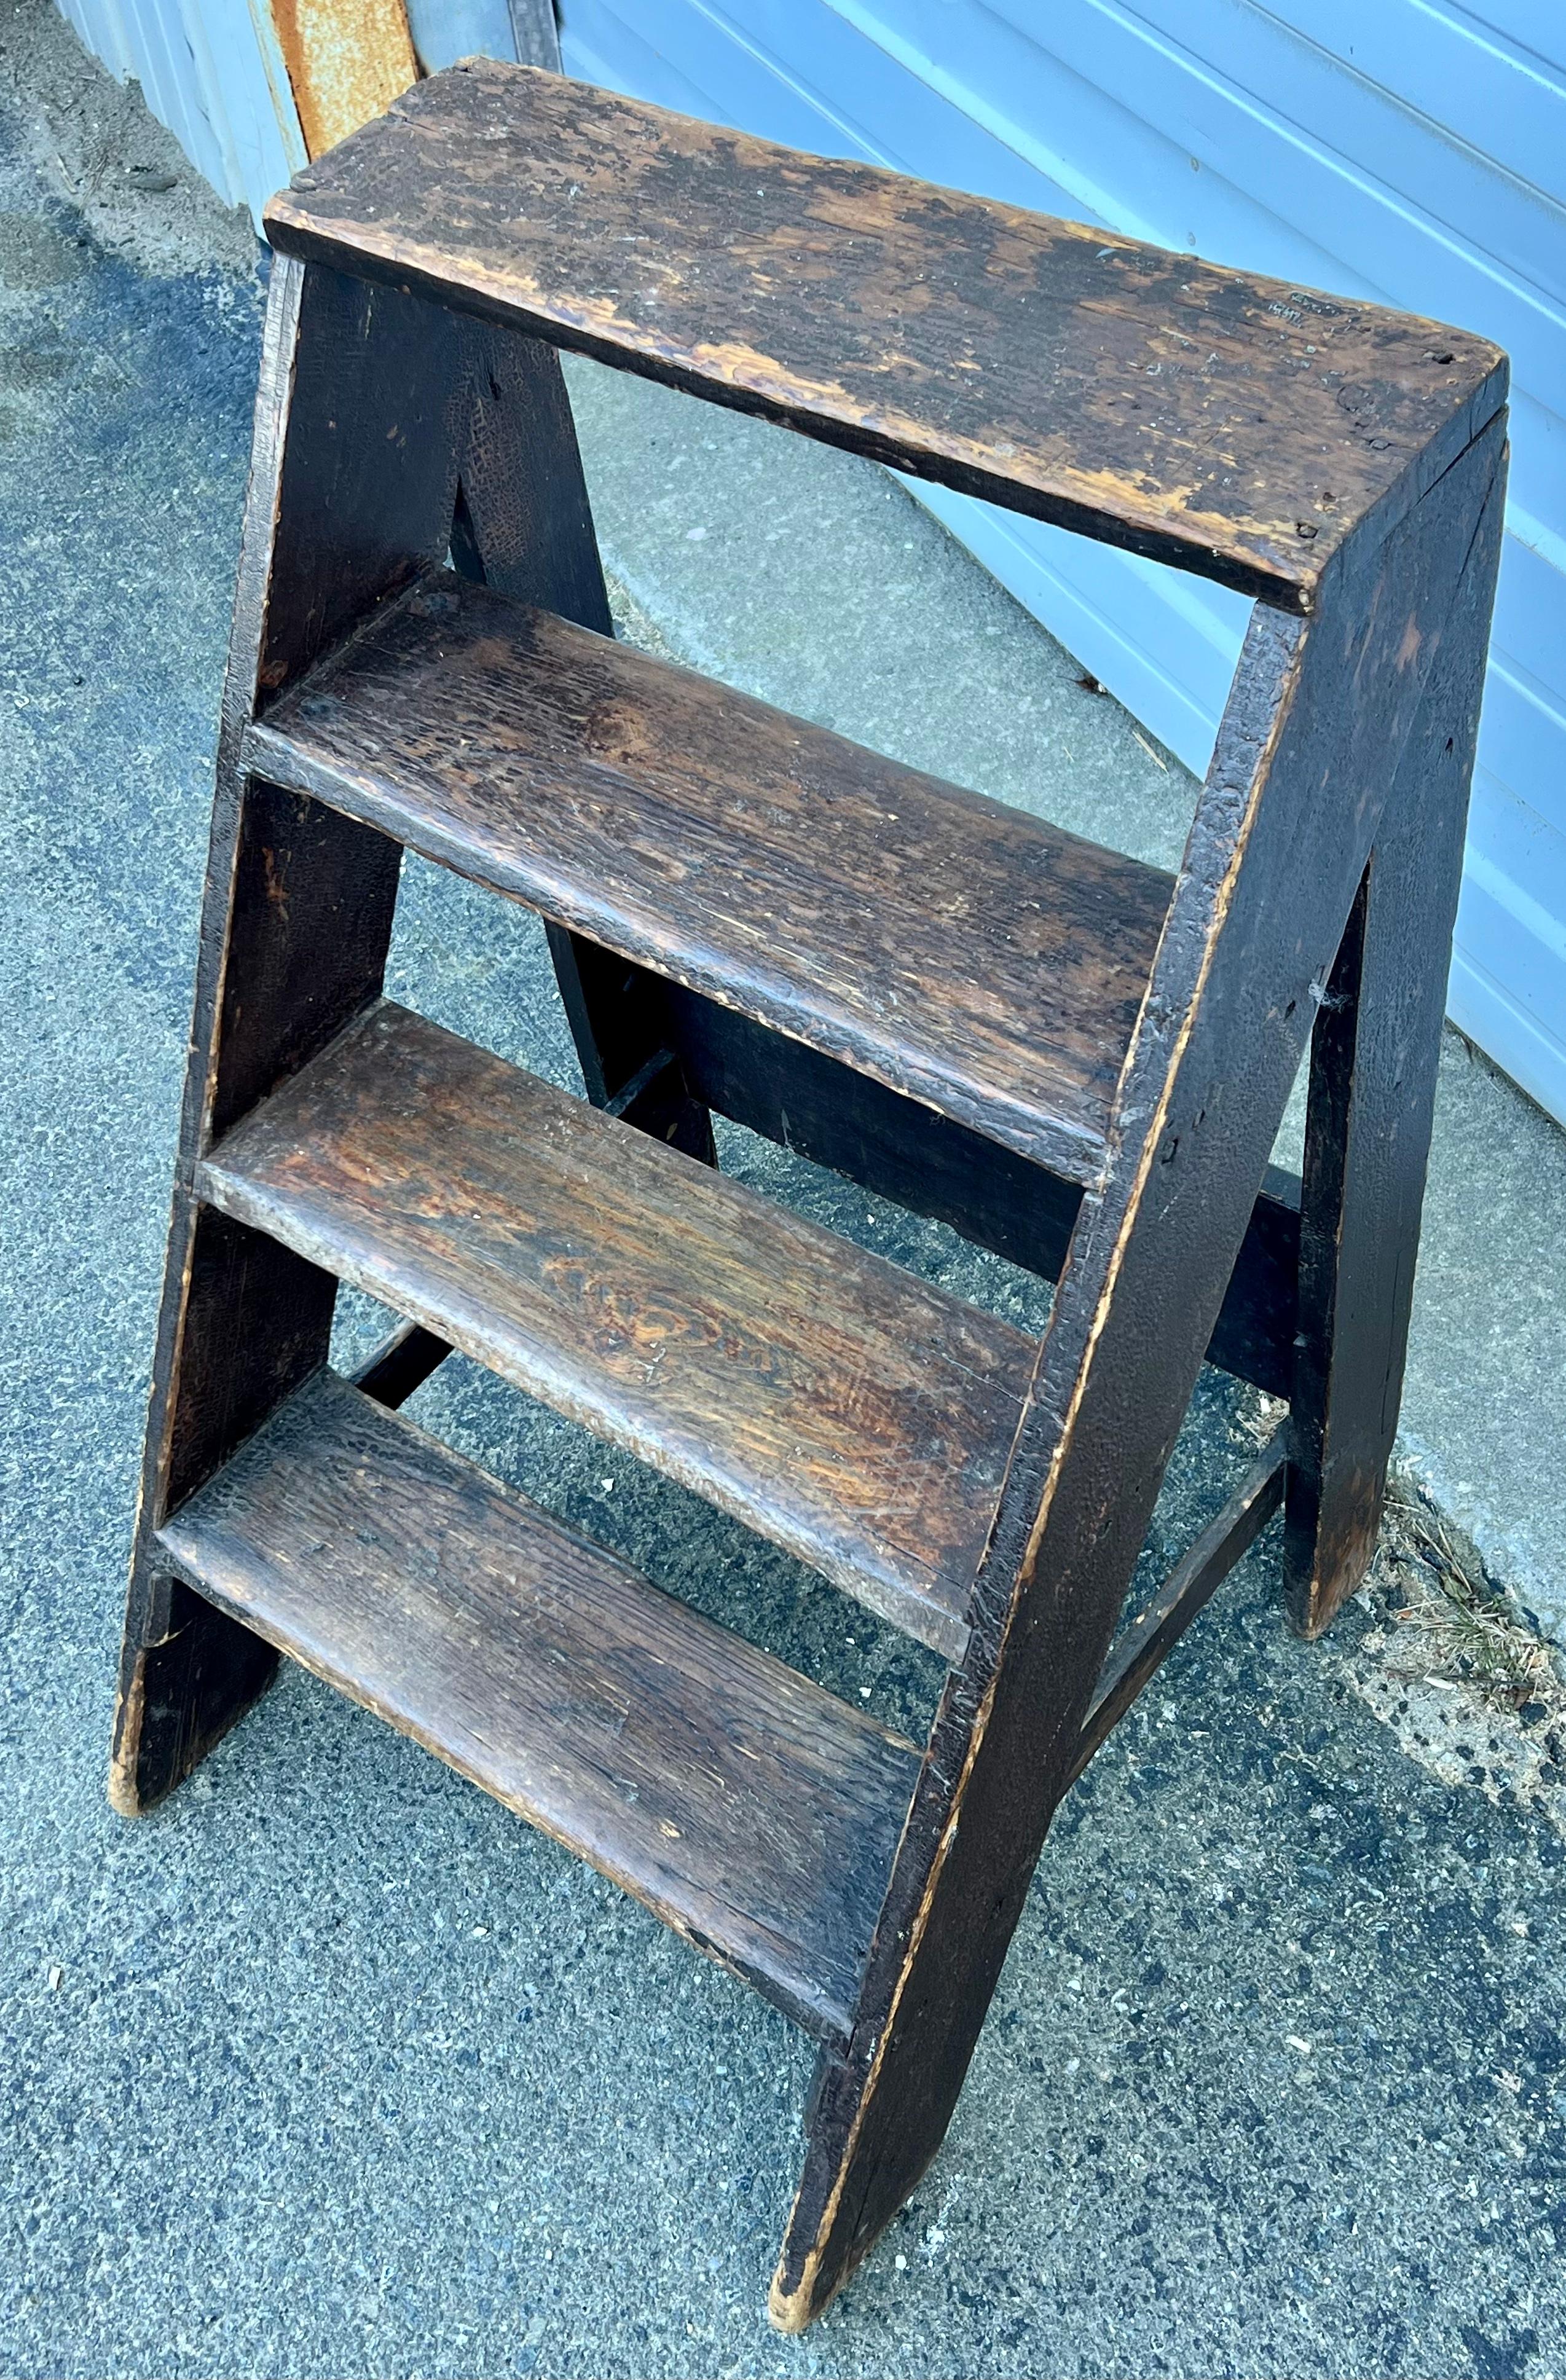 Late 19th century four step wooden stepladder with original surface.  